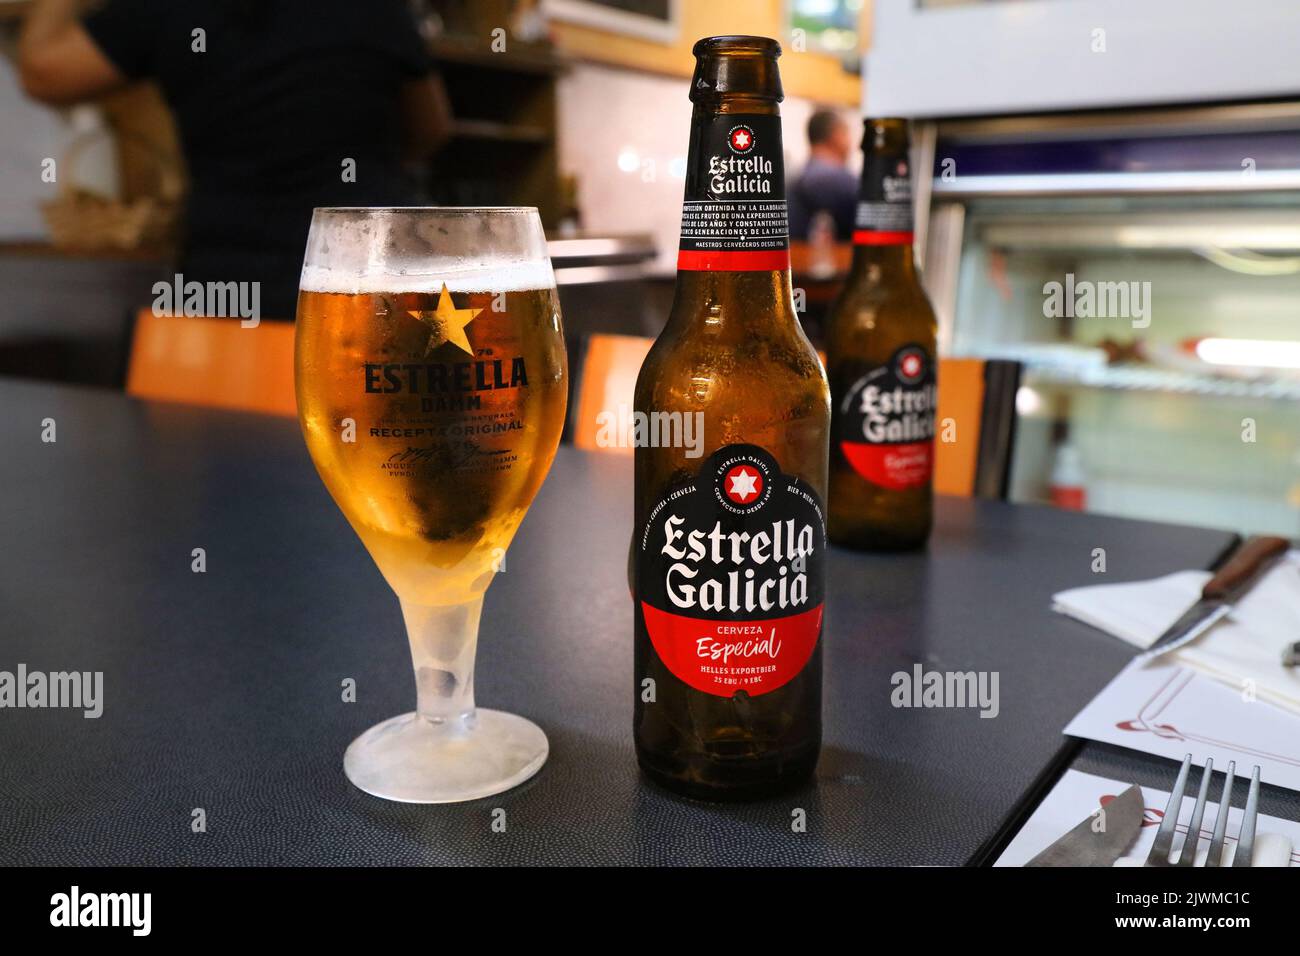 BARCELONA, SPAIN - OCTOBER 7, 2021: Estrella Galicia bottled beer in Barcelona, Spain. It is a pale lager brand of Hijos de Rivera Brewery. Stock Photo